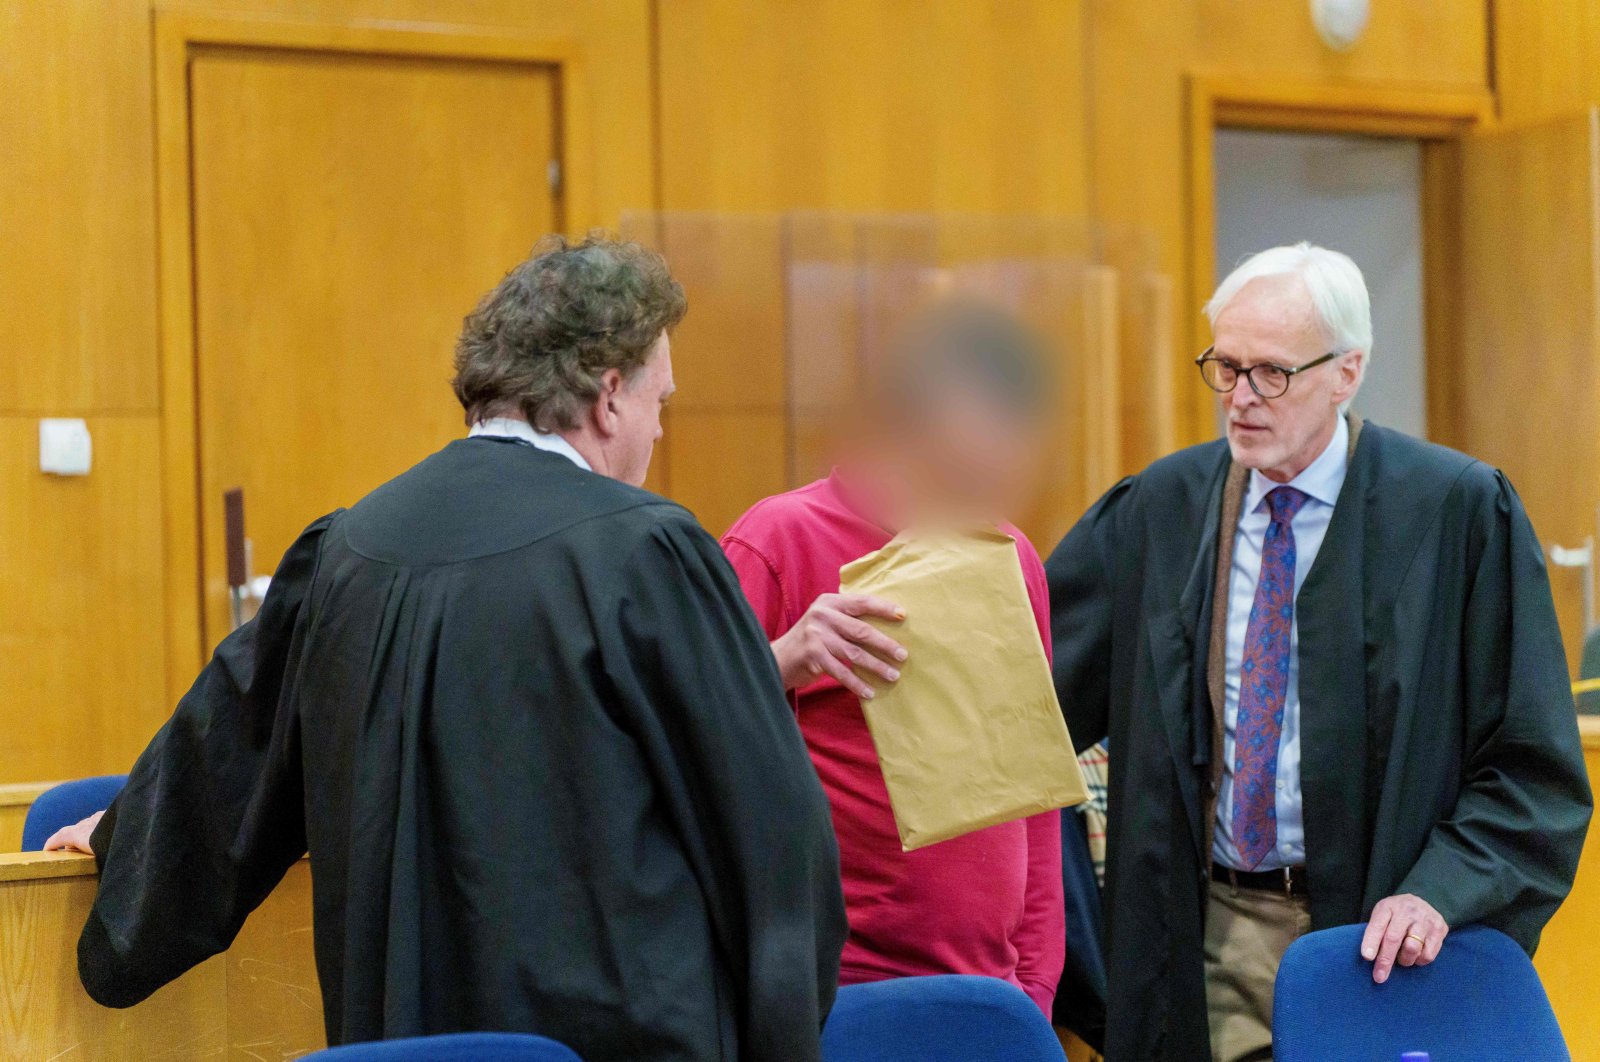 The defendant and alleged author of "NSU 2.0" threatening letters talks to his lawyer ahead of the continuation of his trial in Frankfurt am Main, western Germany, Nov. 17, 2022. (AFP Photo)